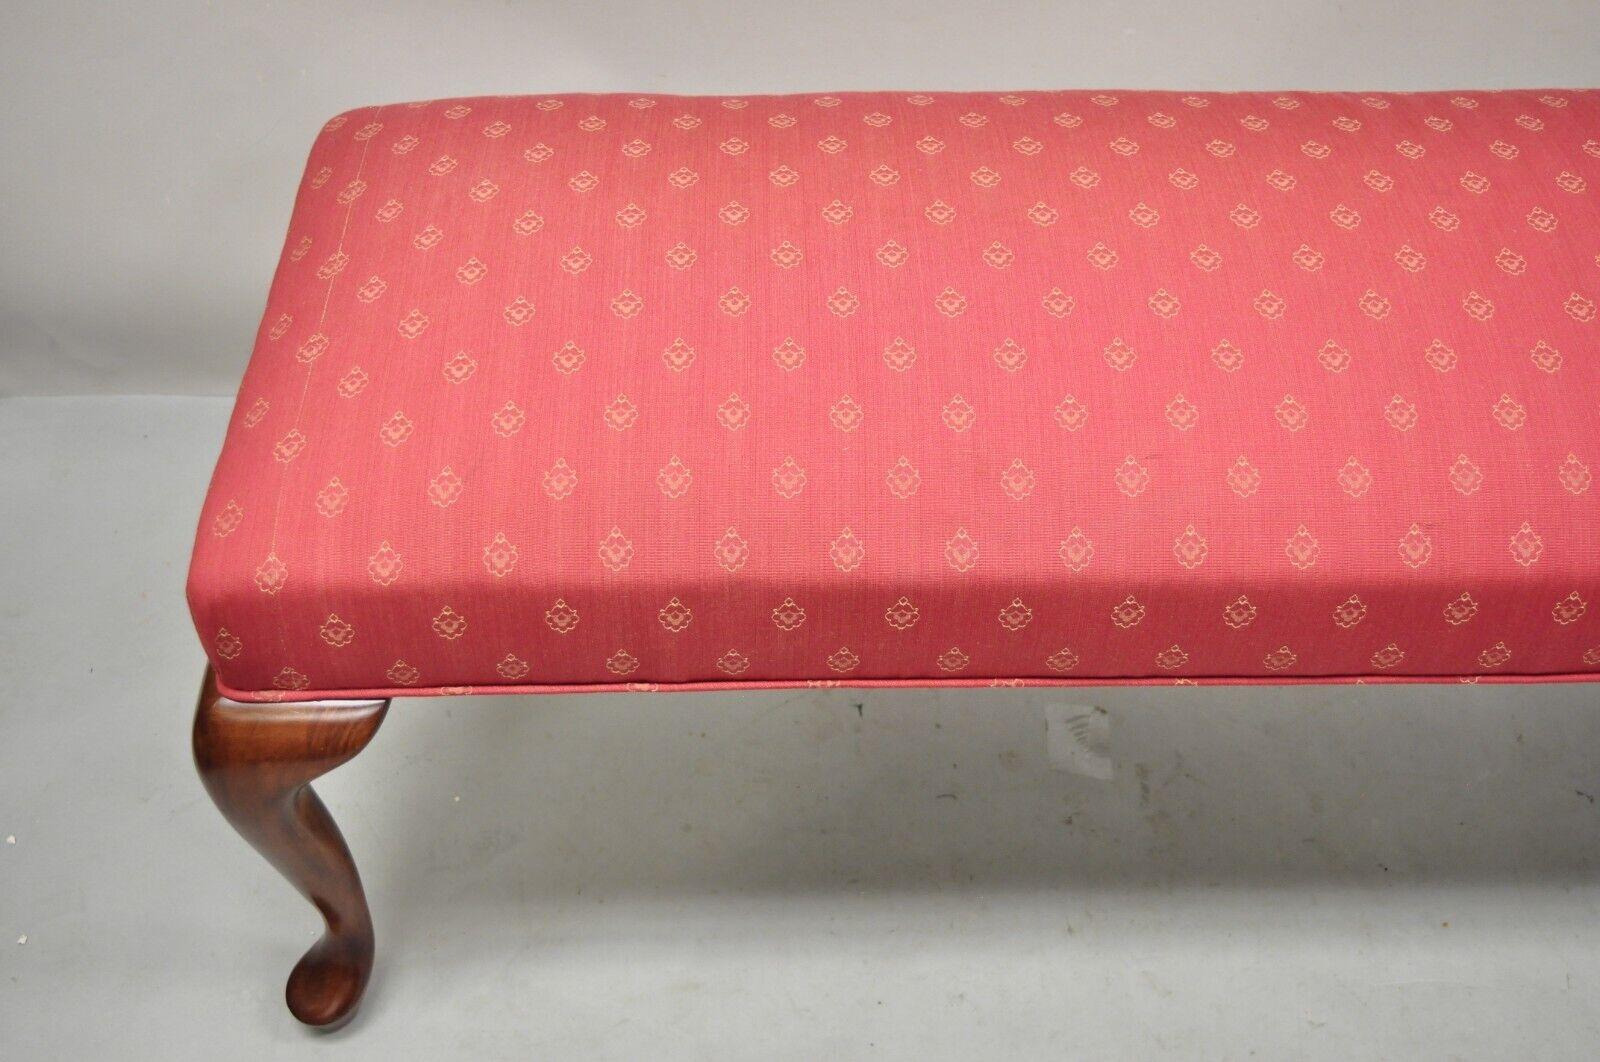 Fabric Queen Anne Style Cherry Wood Red Window Bench